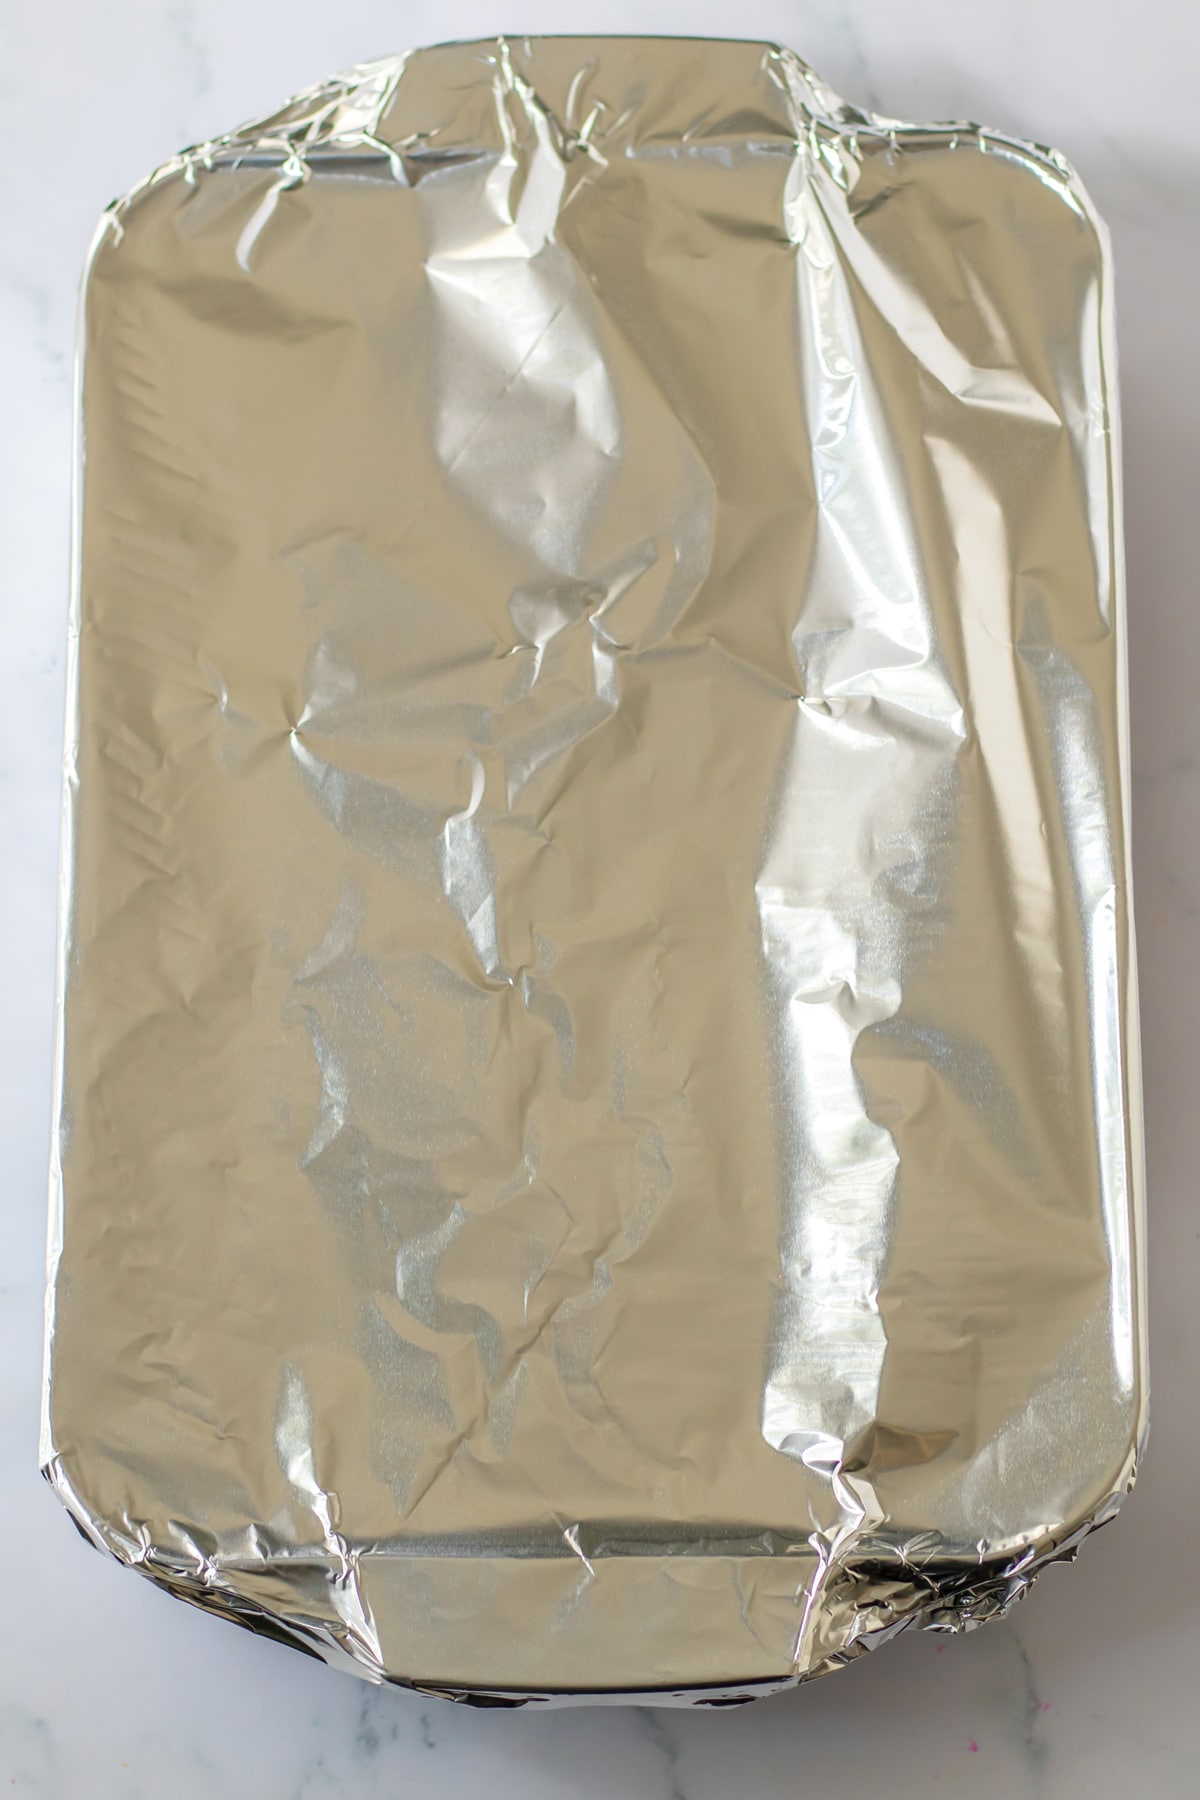 Putting over an aluminum foil to cover the meat is another process in preparing Beef Tips